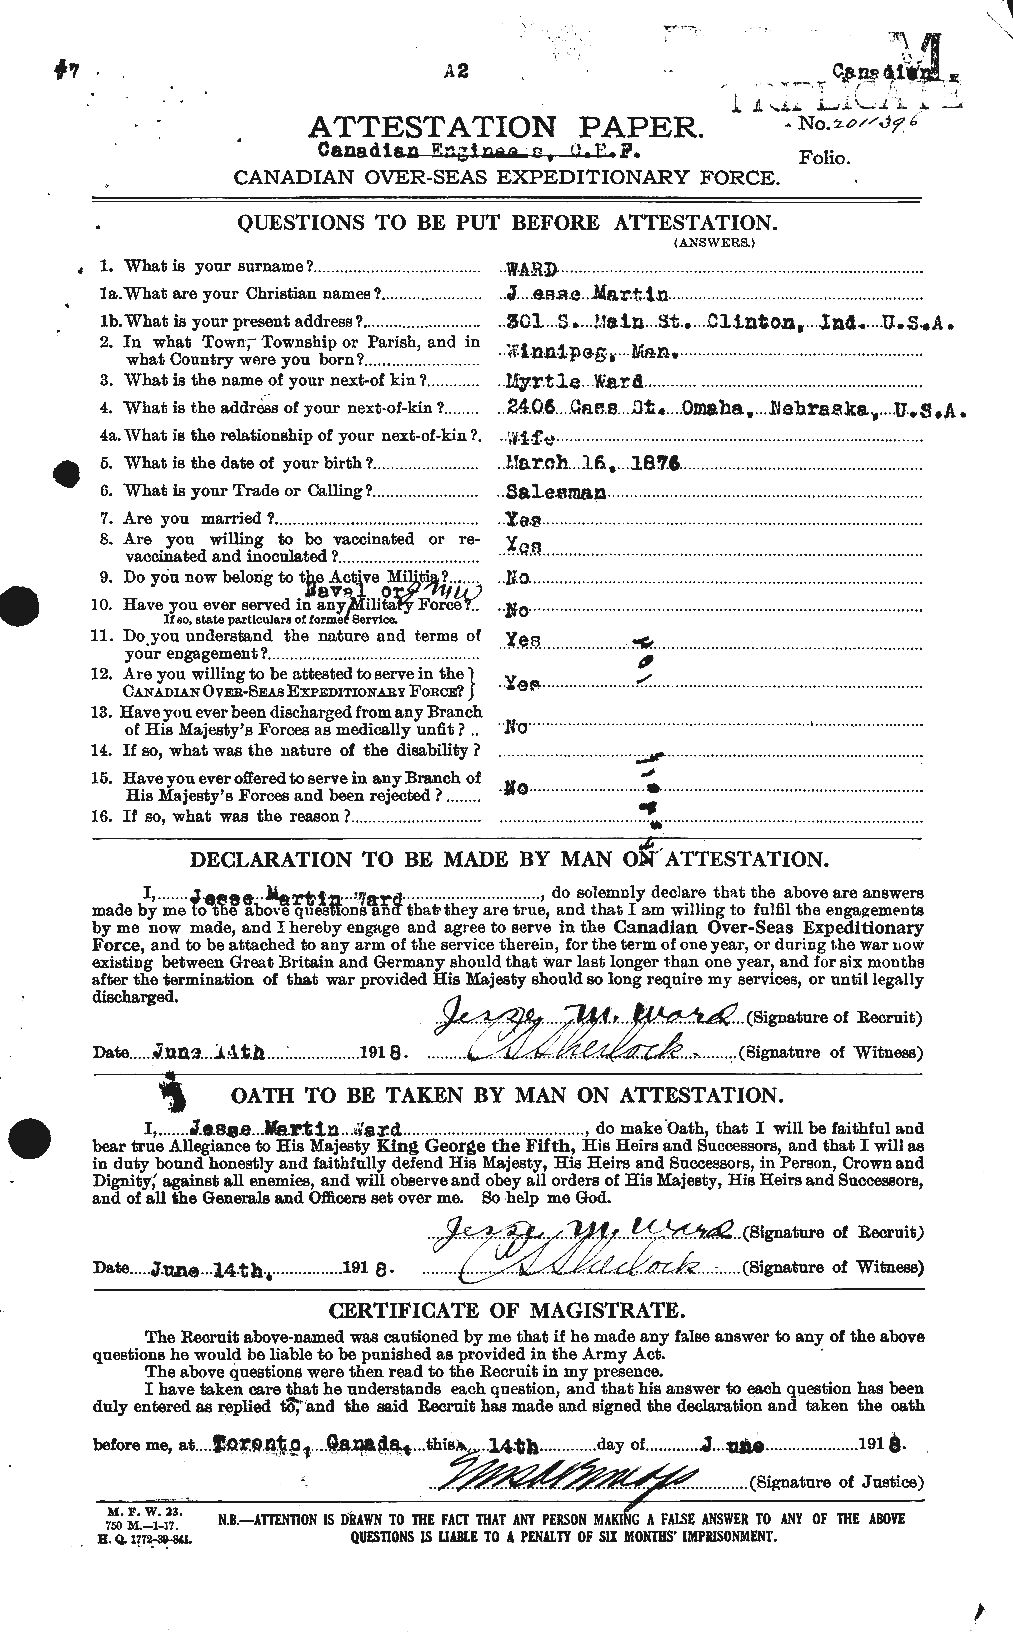 Personnel Records of the First World War - CEF 657921a